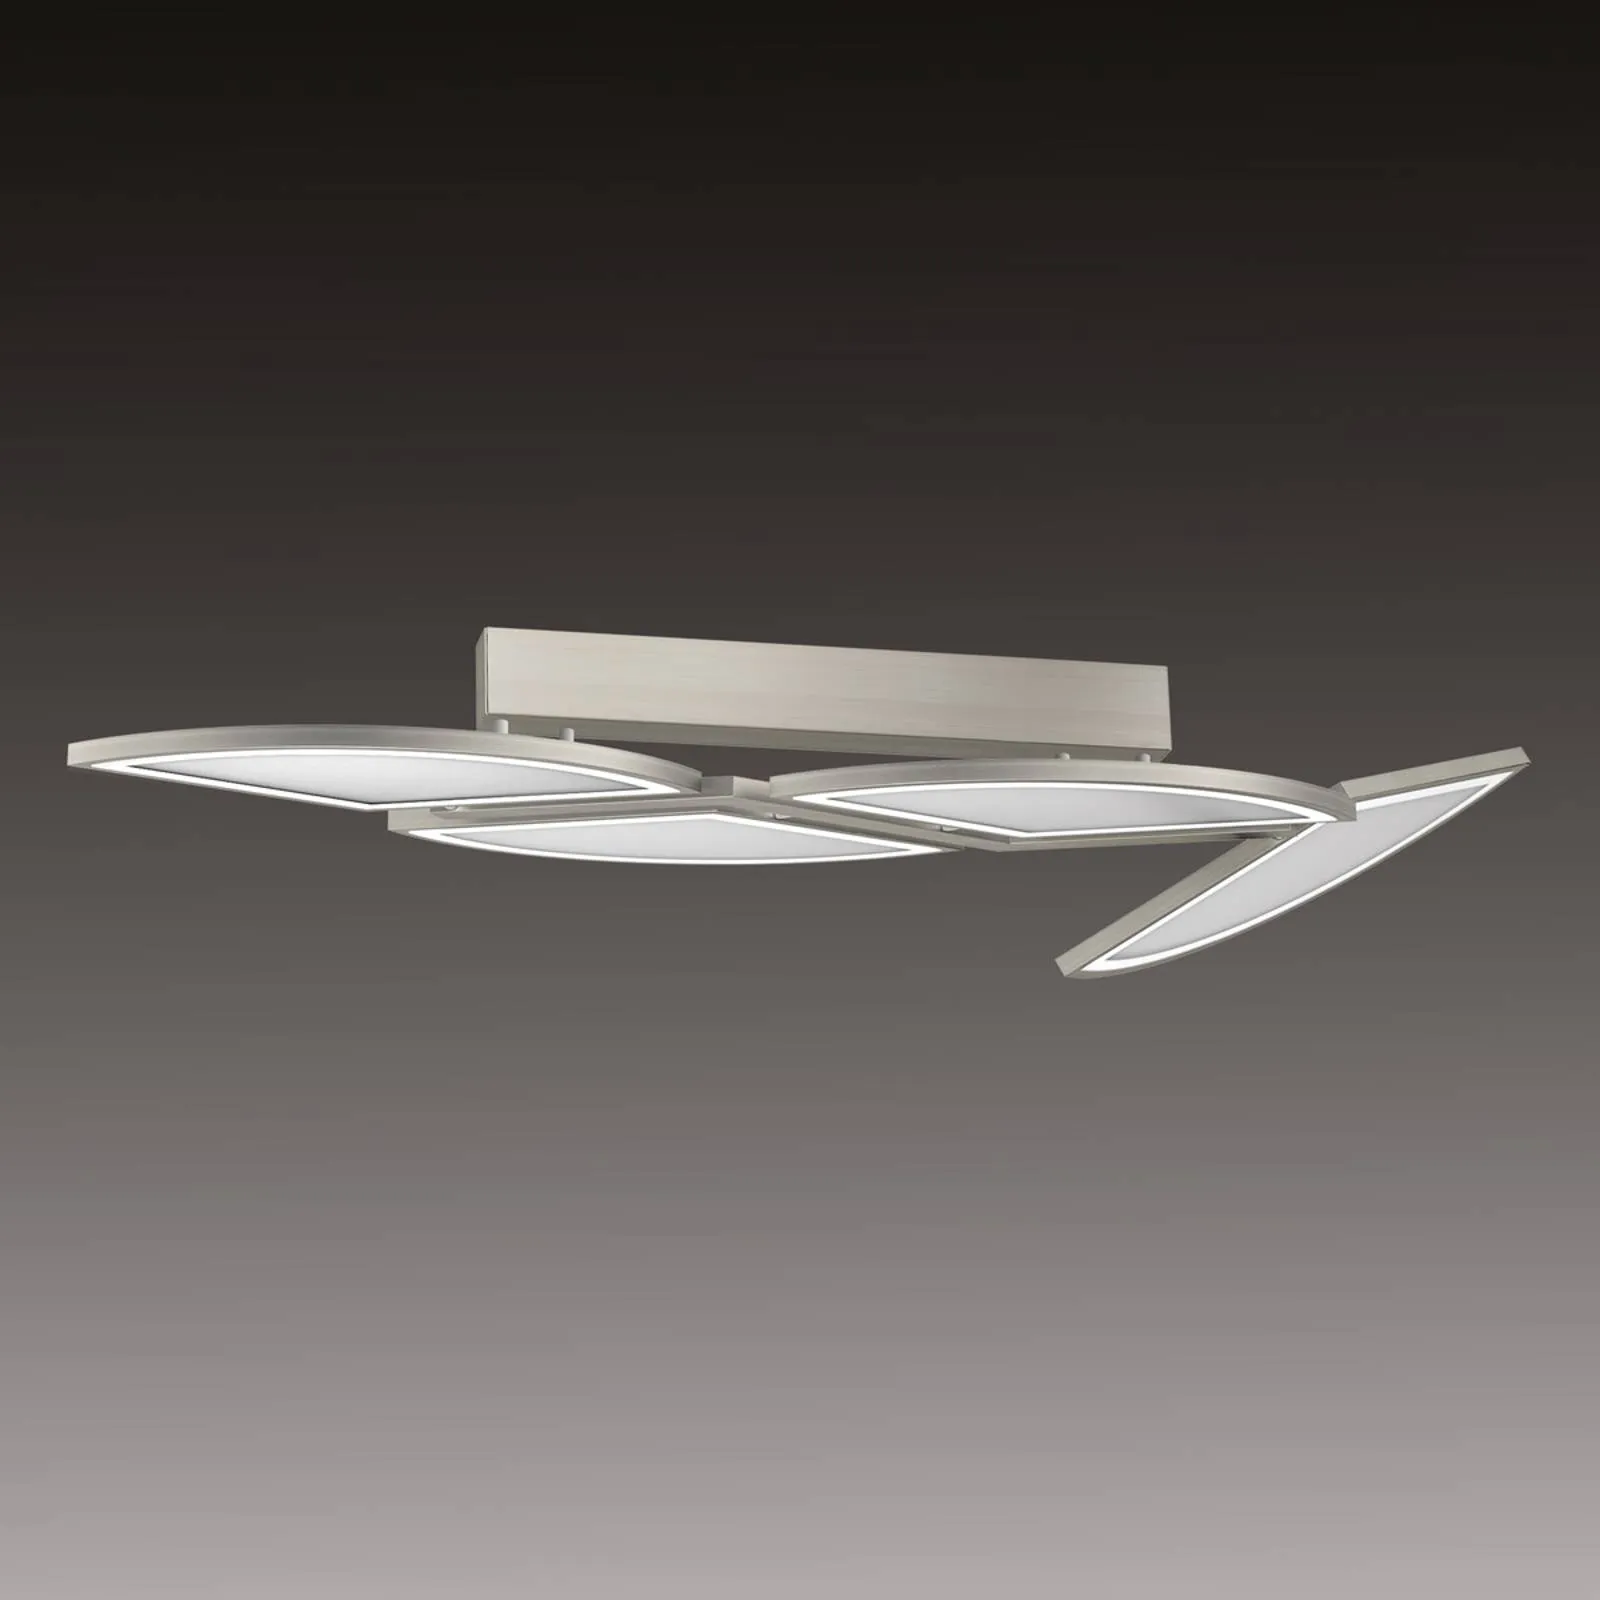 Movil - LED ceiling light with 4 light segments